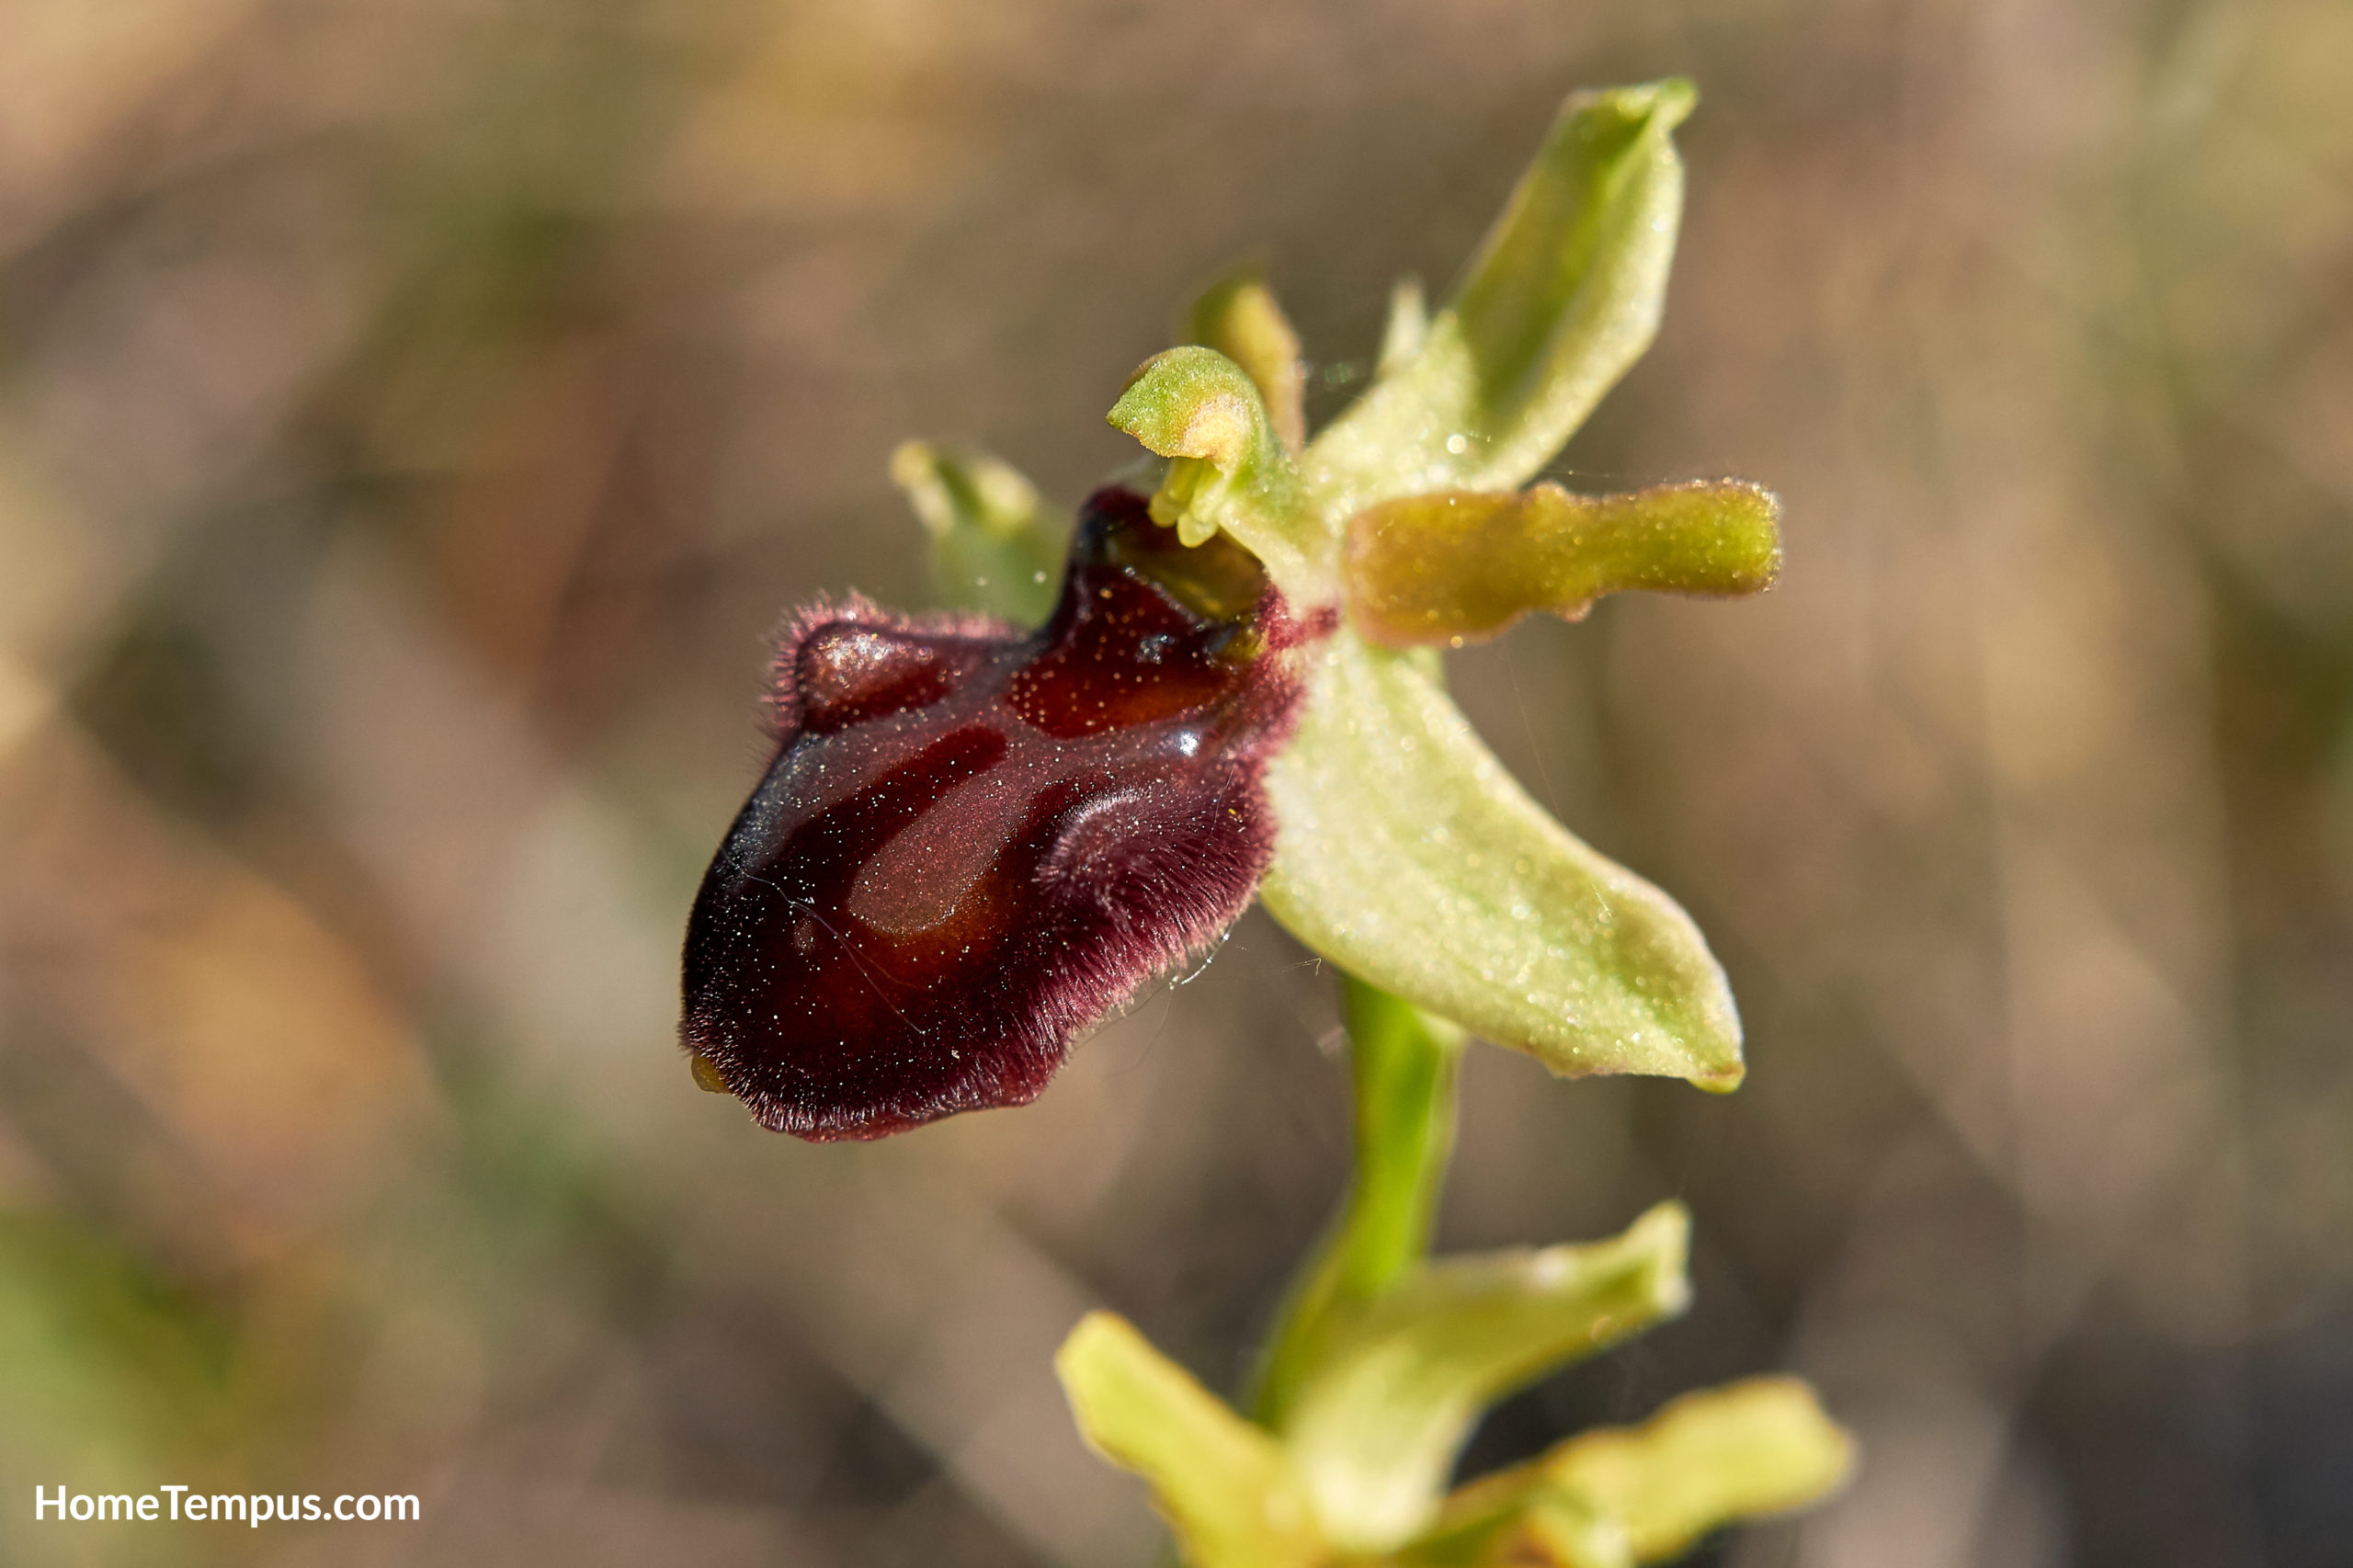 Early-spider orchid (Ophrys sphegode) flowers that start with E